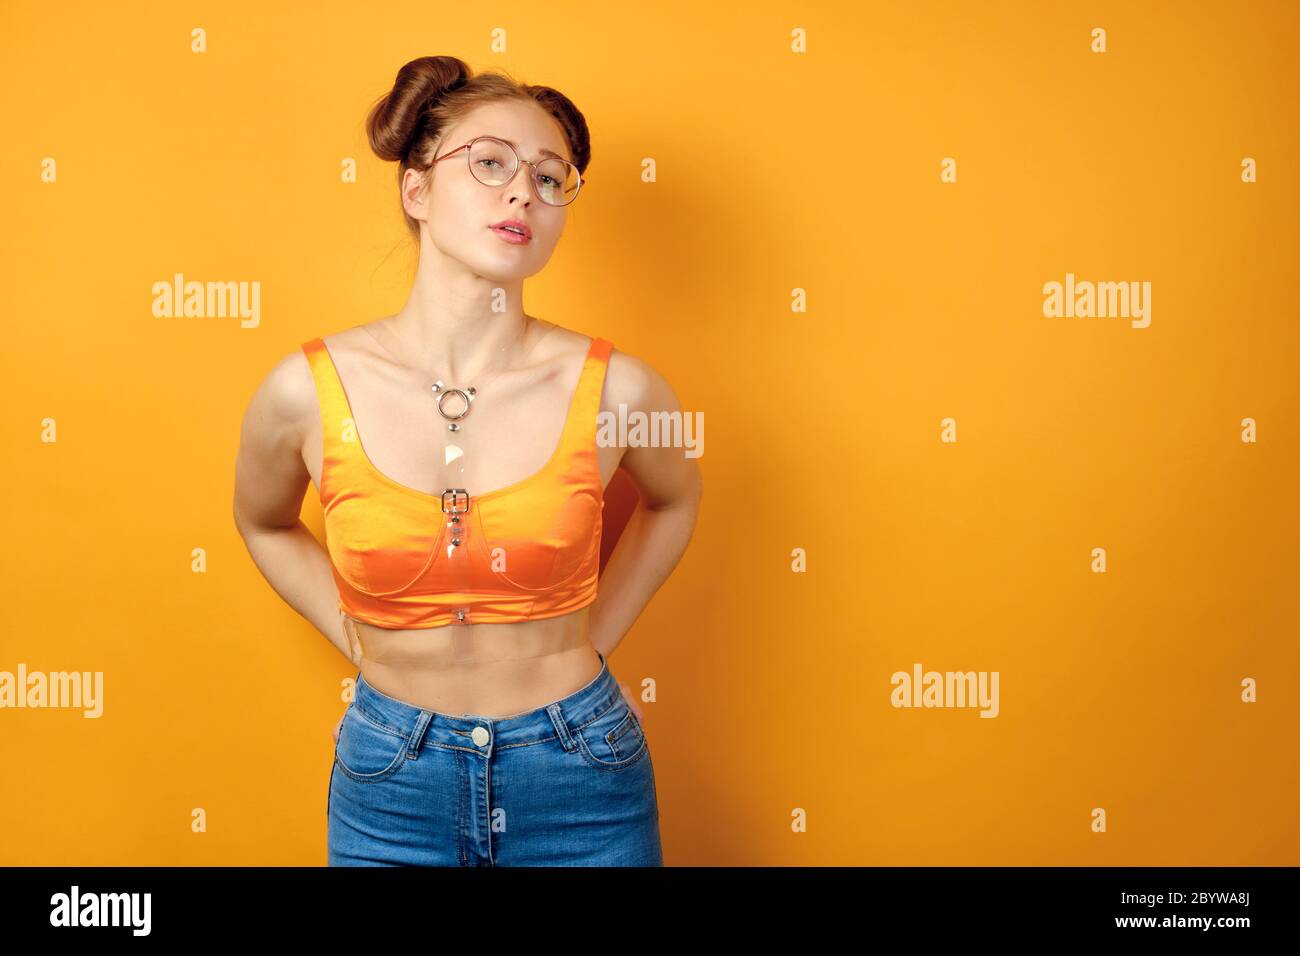 Redhead girl in round glasses and an orange top stands on a yellow background, holding her hands in the back pockets of jeans Stock Photo